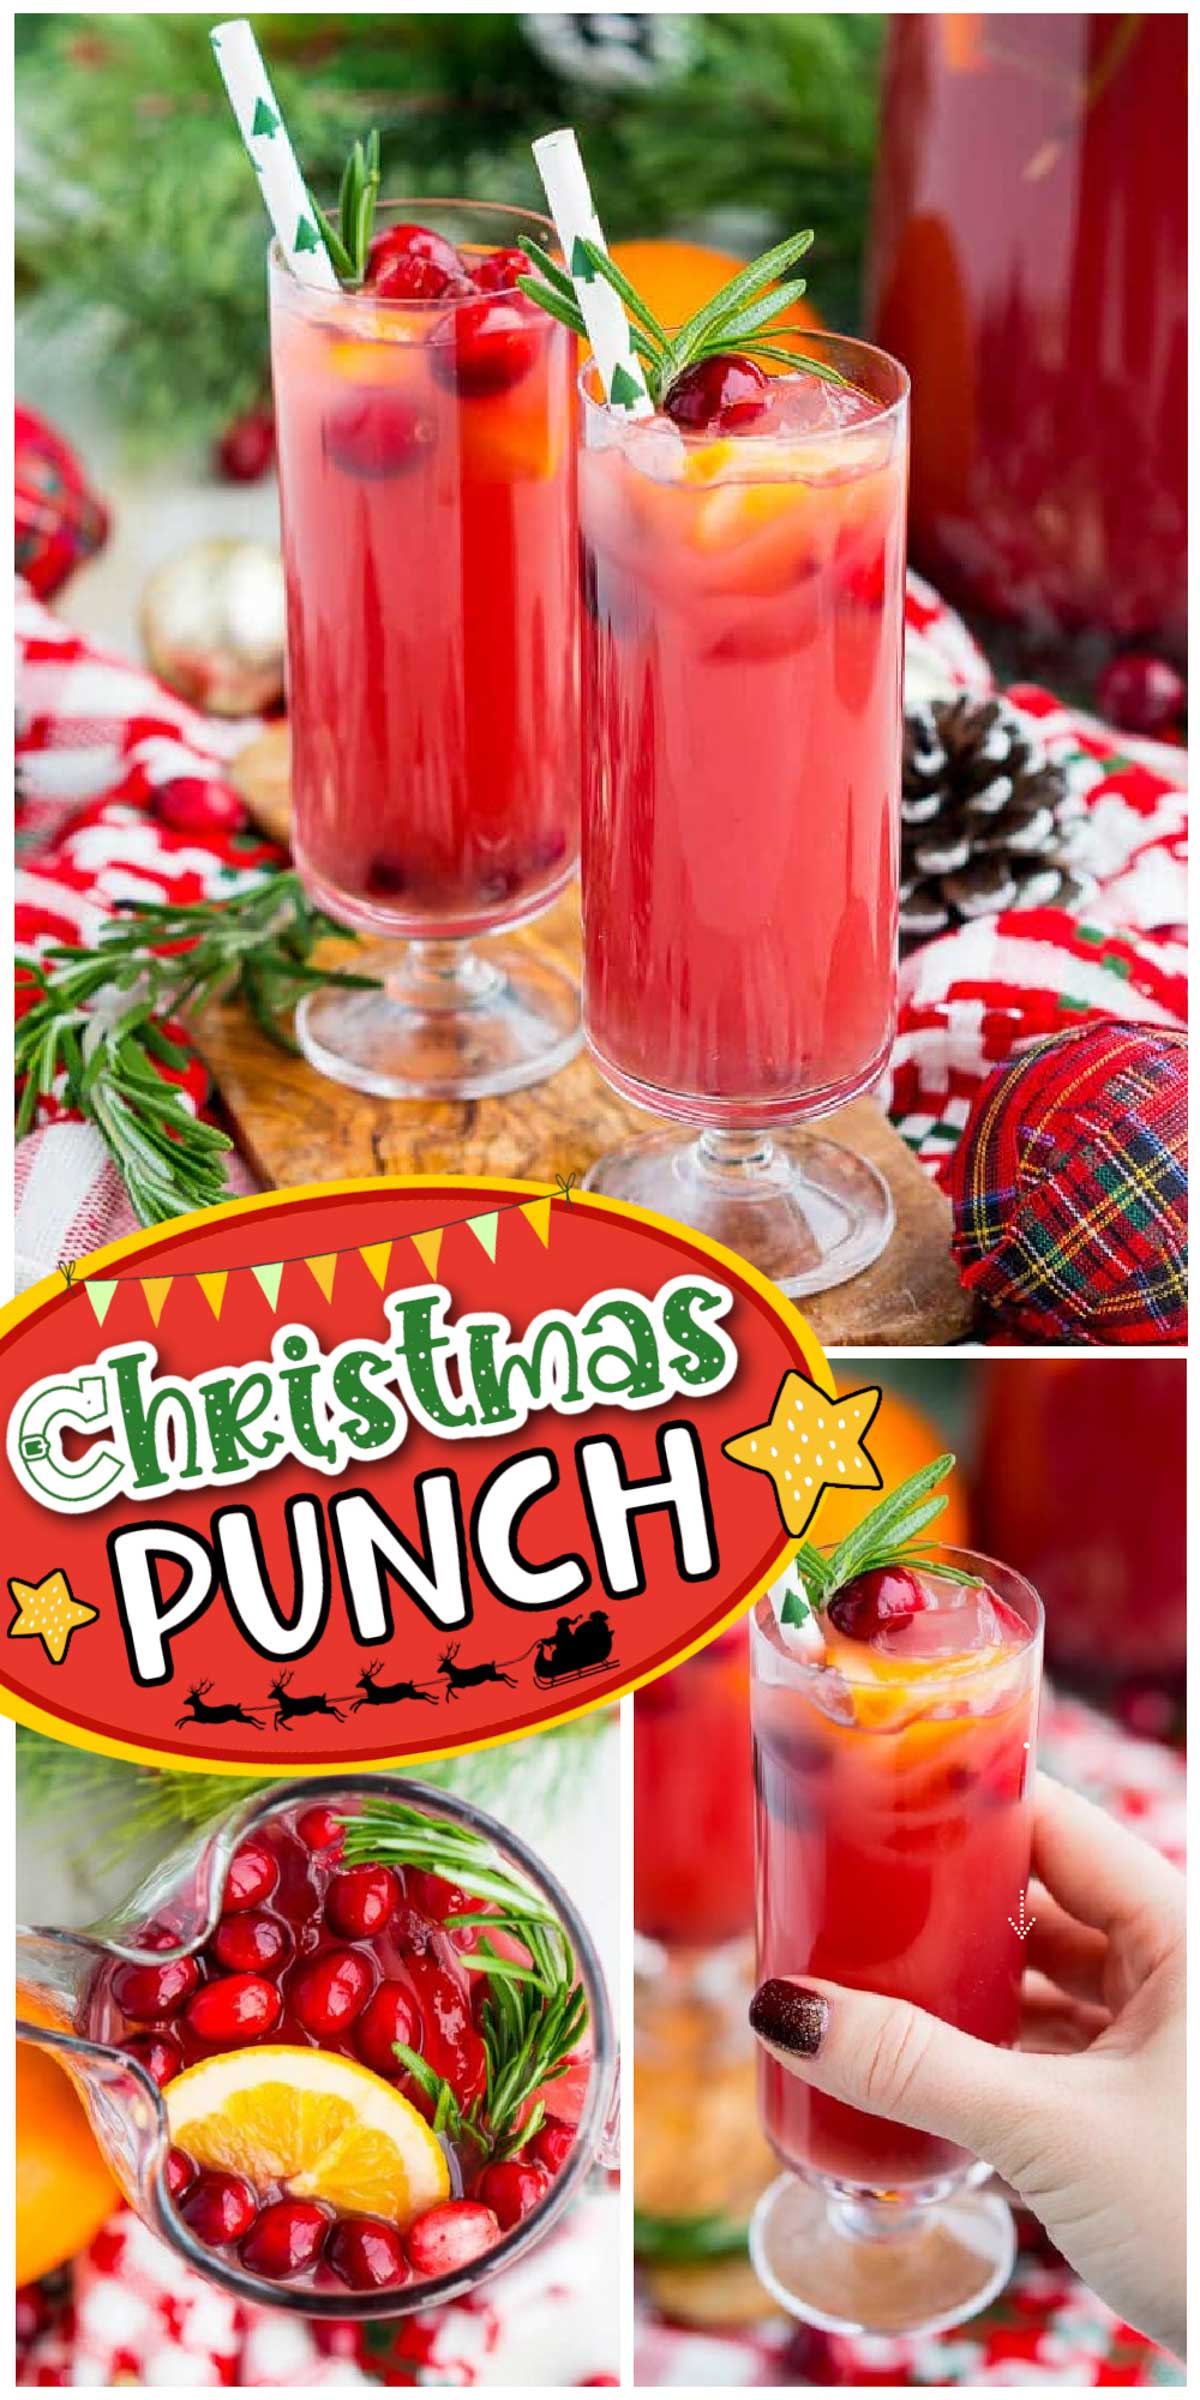 Christmas Punch is an easy and delicious holiday party drink packed with fruits like cranberries, oranges, and pomegranates. Keep it non-alcoholic or add rum or vodka for extra holiday spirit! via @sugarandsoulco